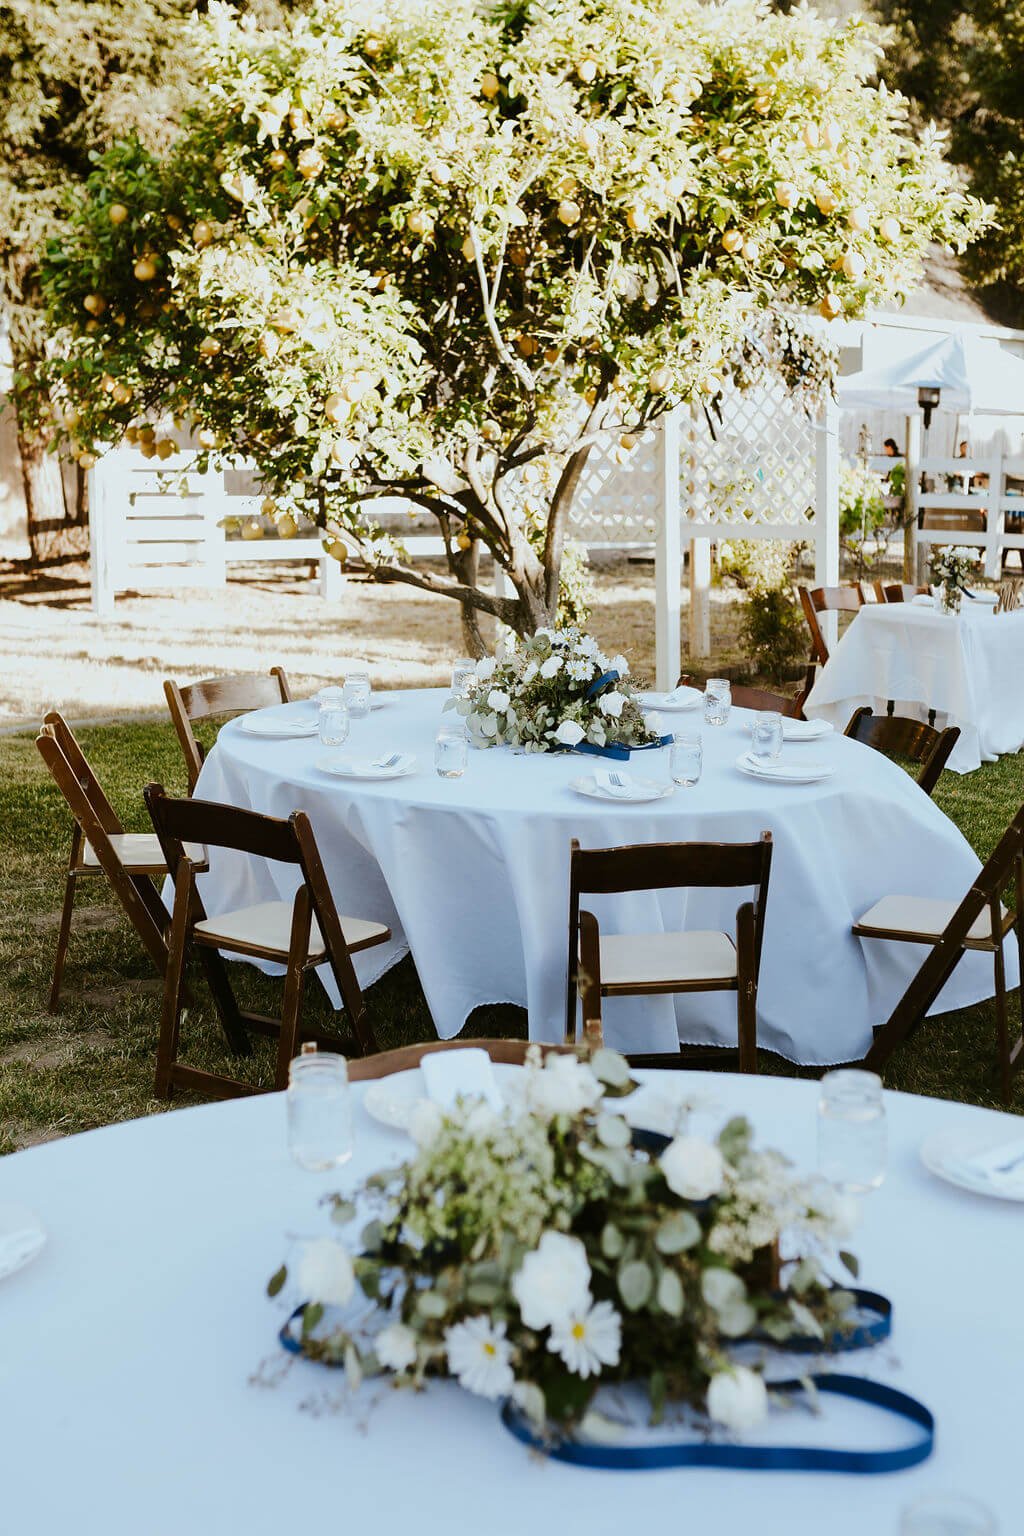 Reception tables on green lawn with lemon trees for Southern California wedding